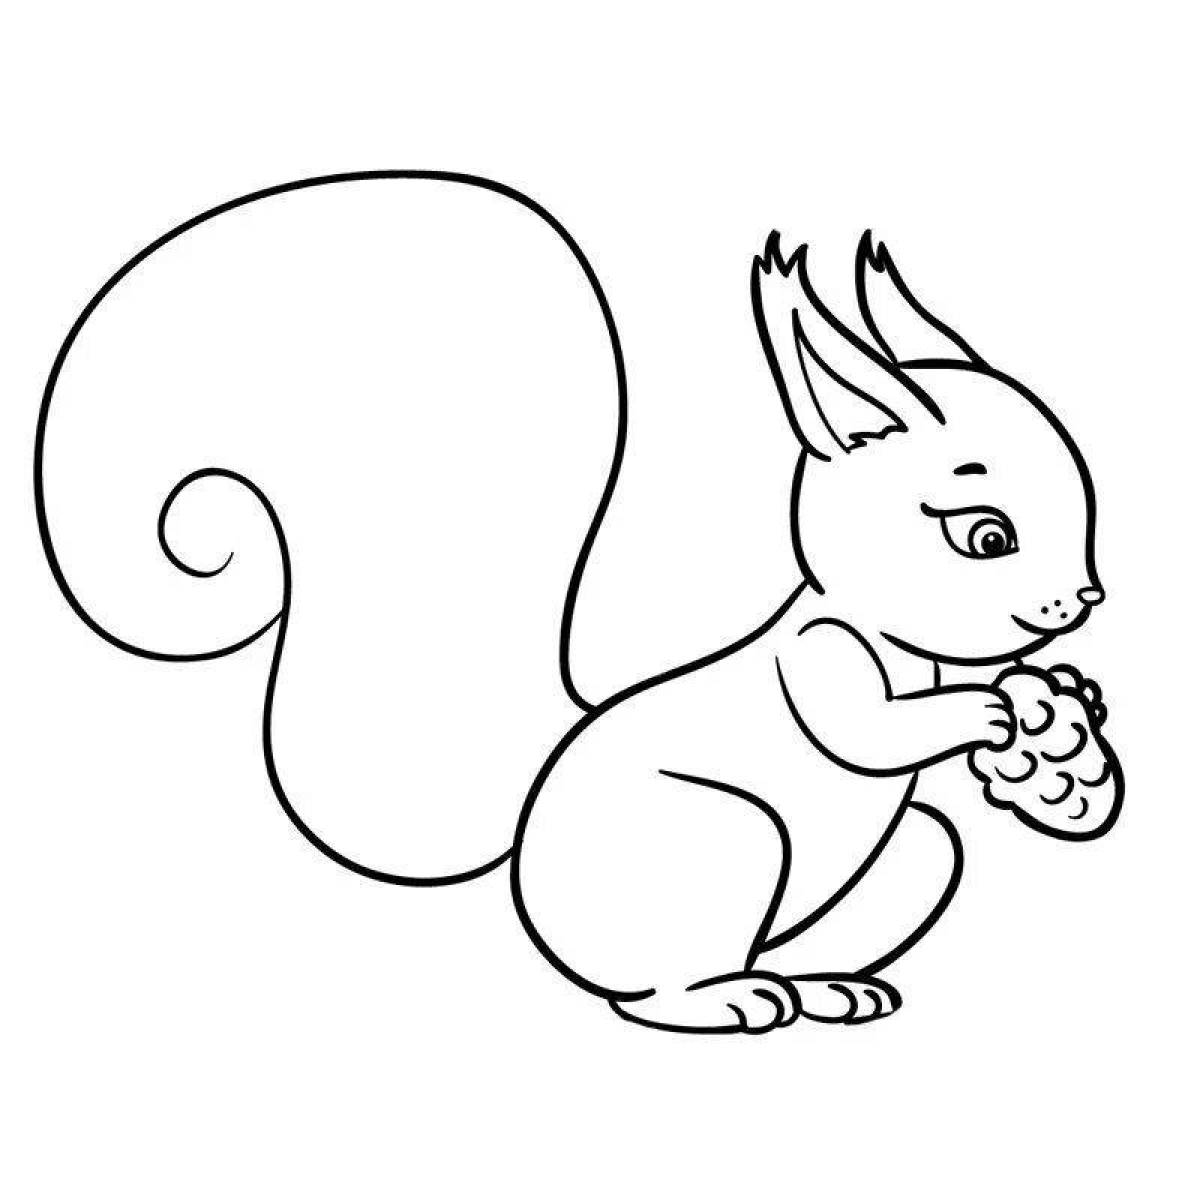 Incredible squirrel coloring book for kids